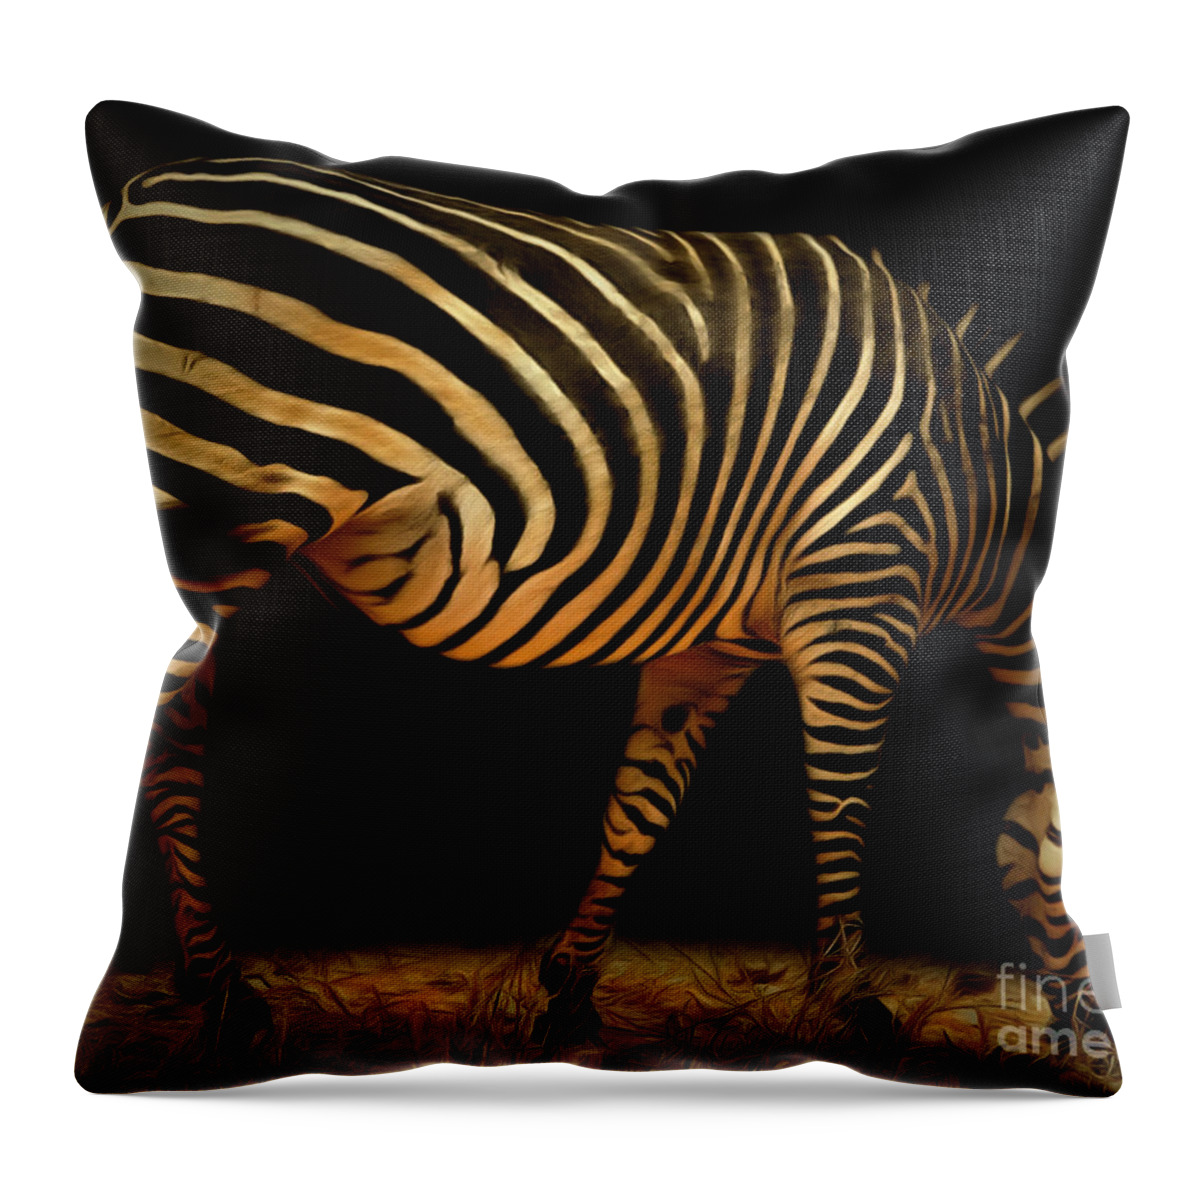 Zebra Throw Pillow featuring the photograph Zebra 20150210brun by Wingsdomain Art and Photography